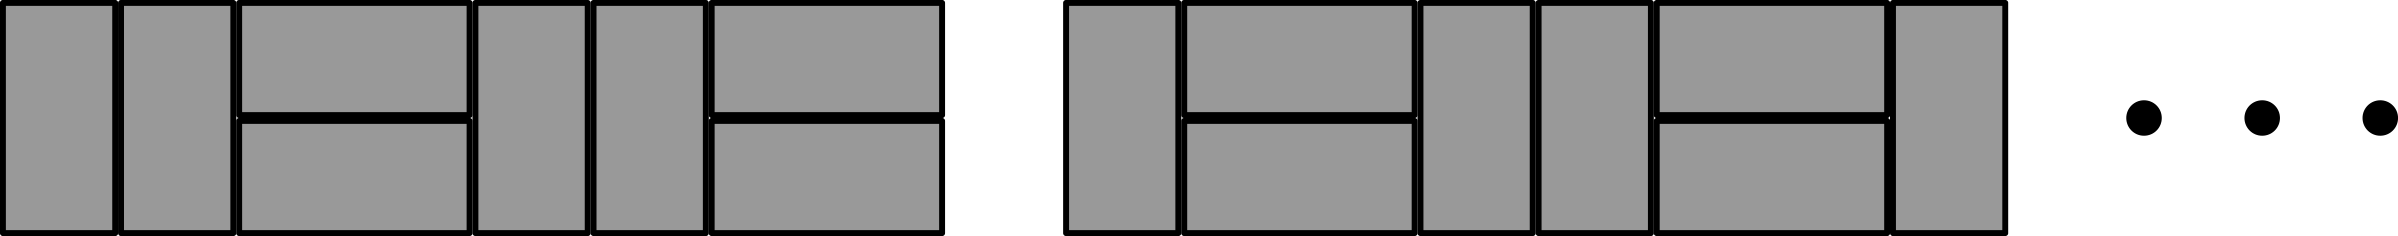 One arrangement alternates between two vertical rectangles and two horizontal rectangles. The other has one vertical rectangle, then two horizontal rectangles, then two vertical rectangles, then two horizontal rectangles, then one vertical rectangle.